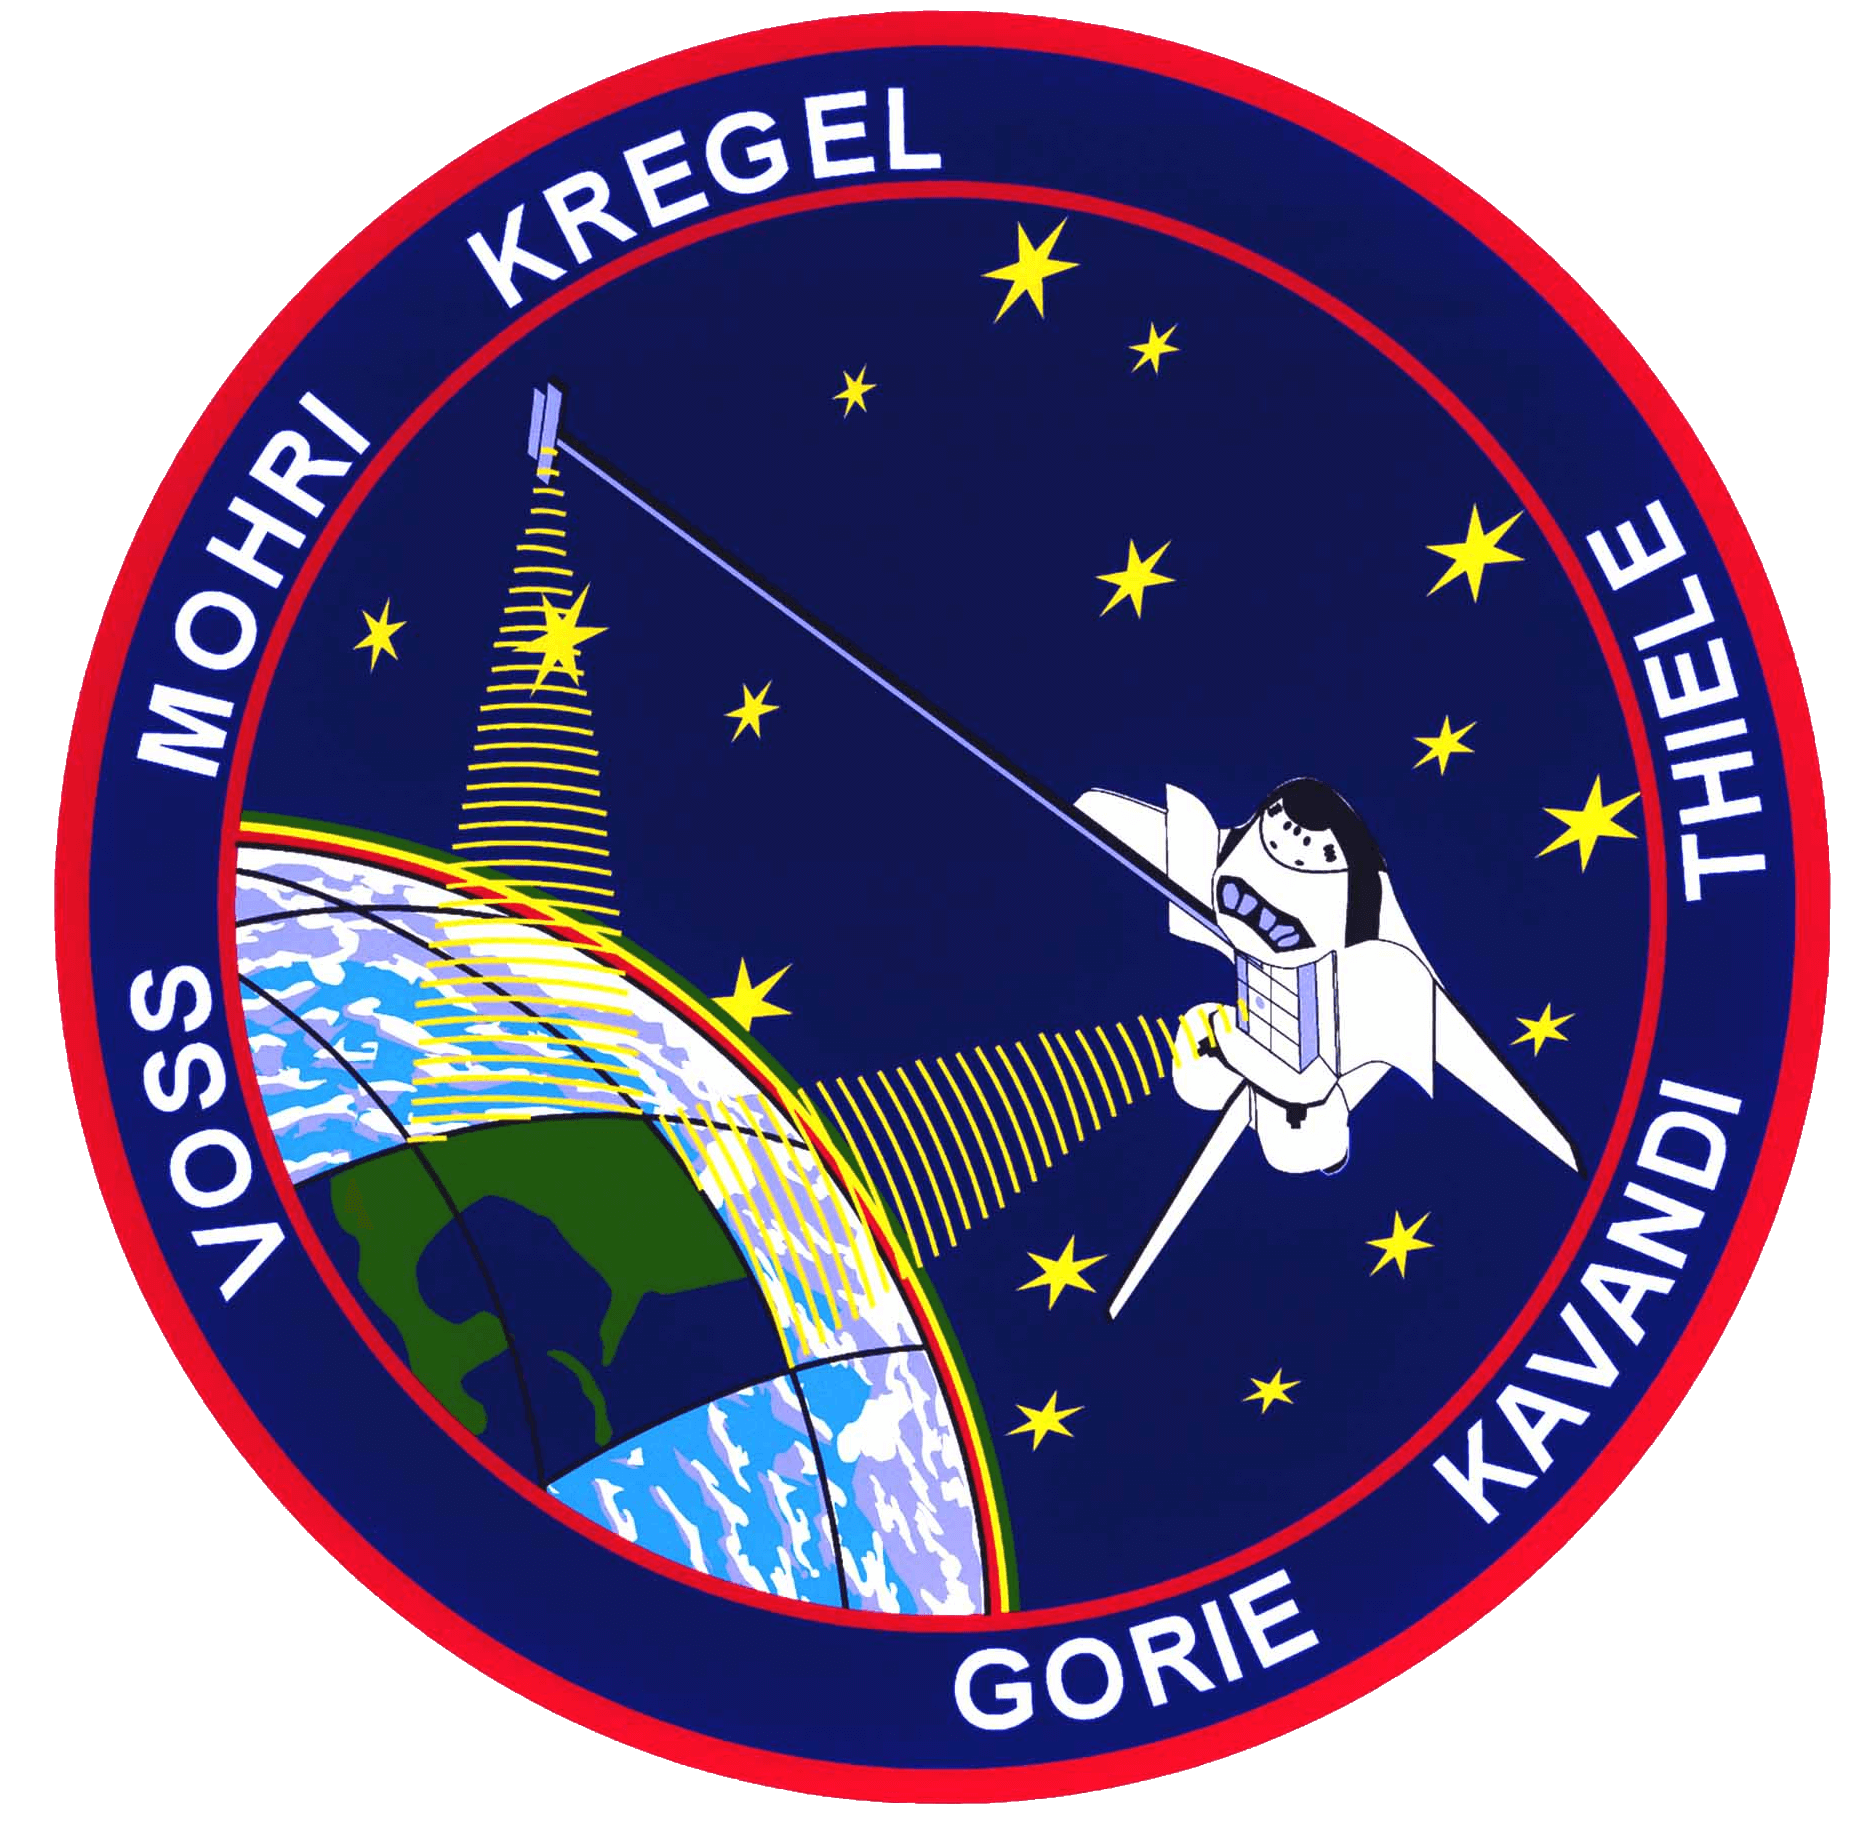 Mission patch for STS-99